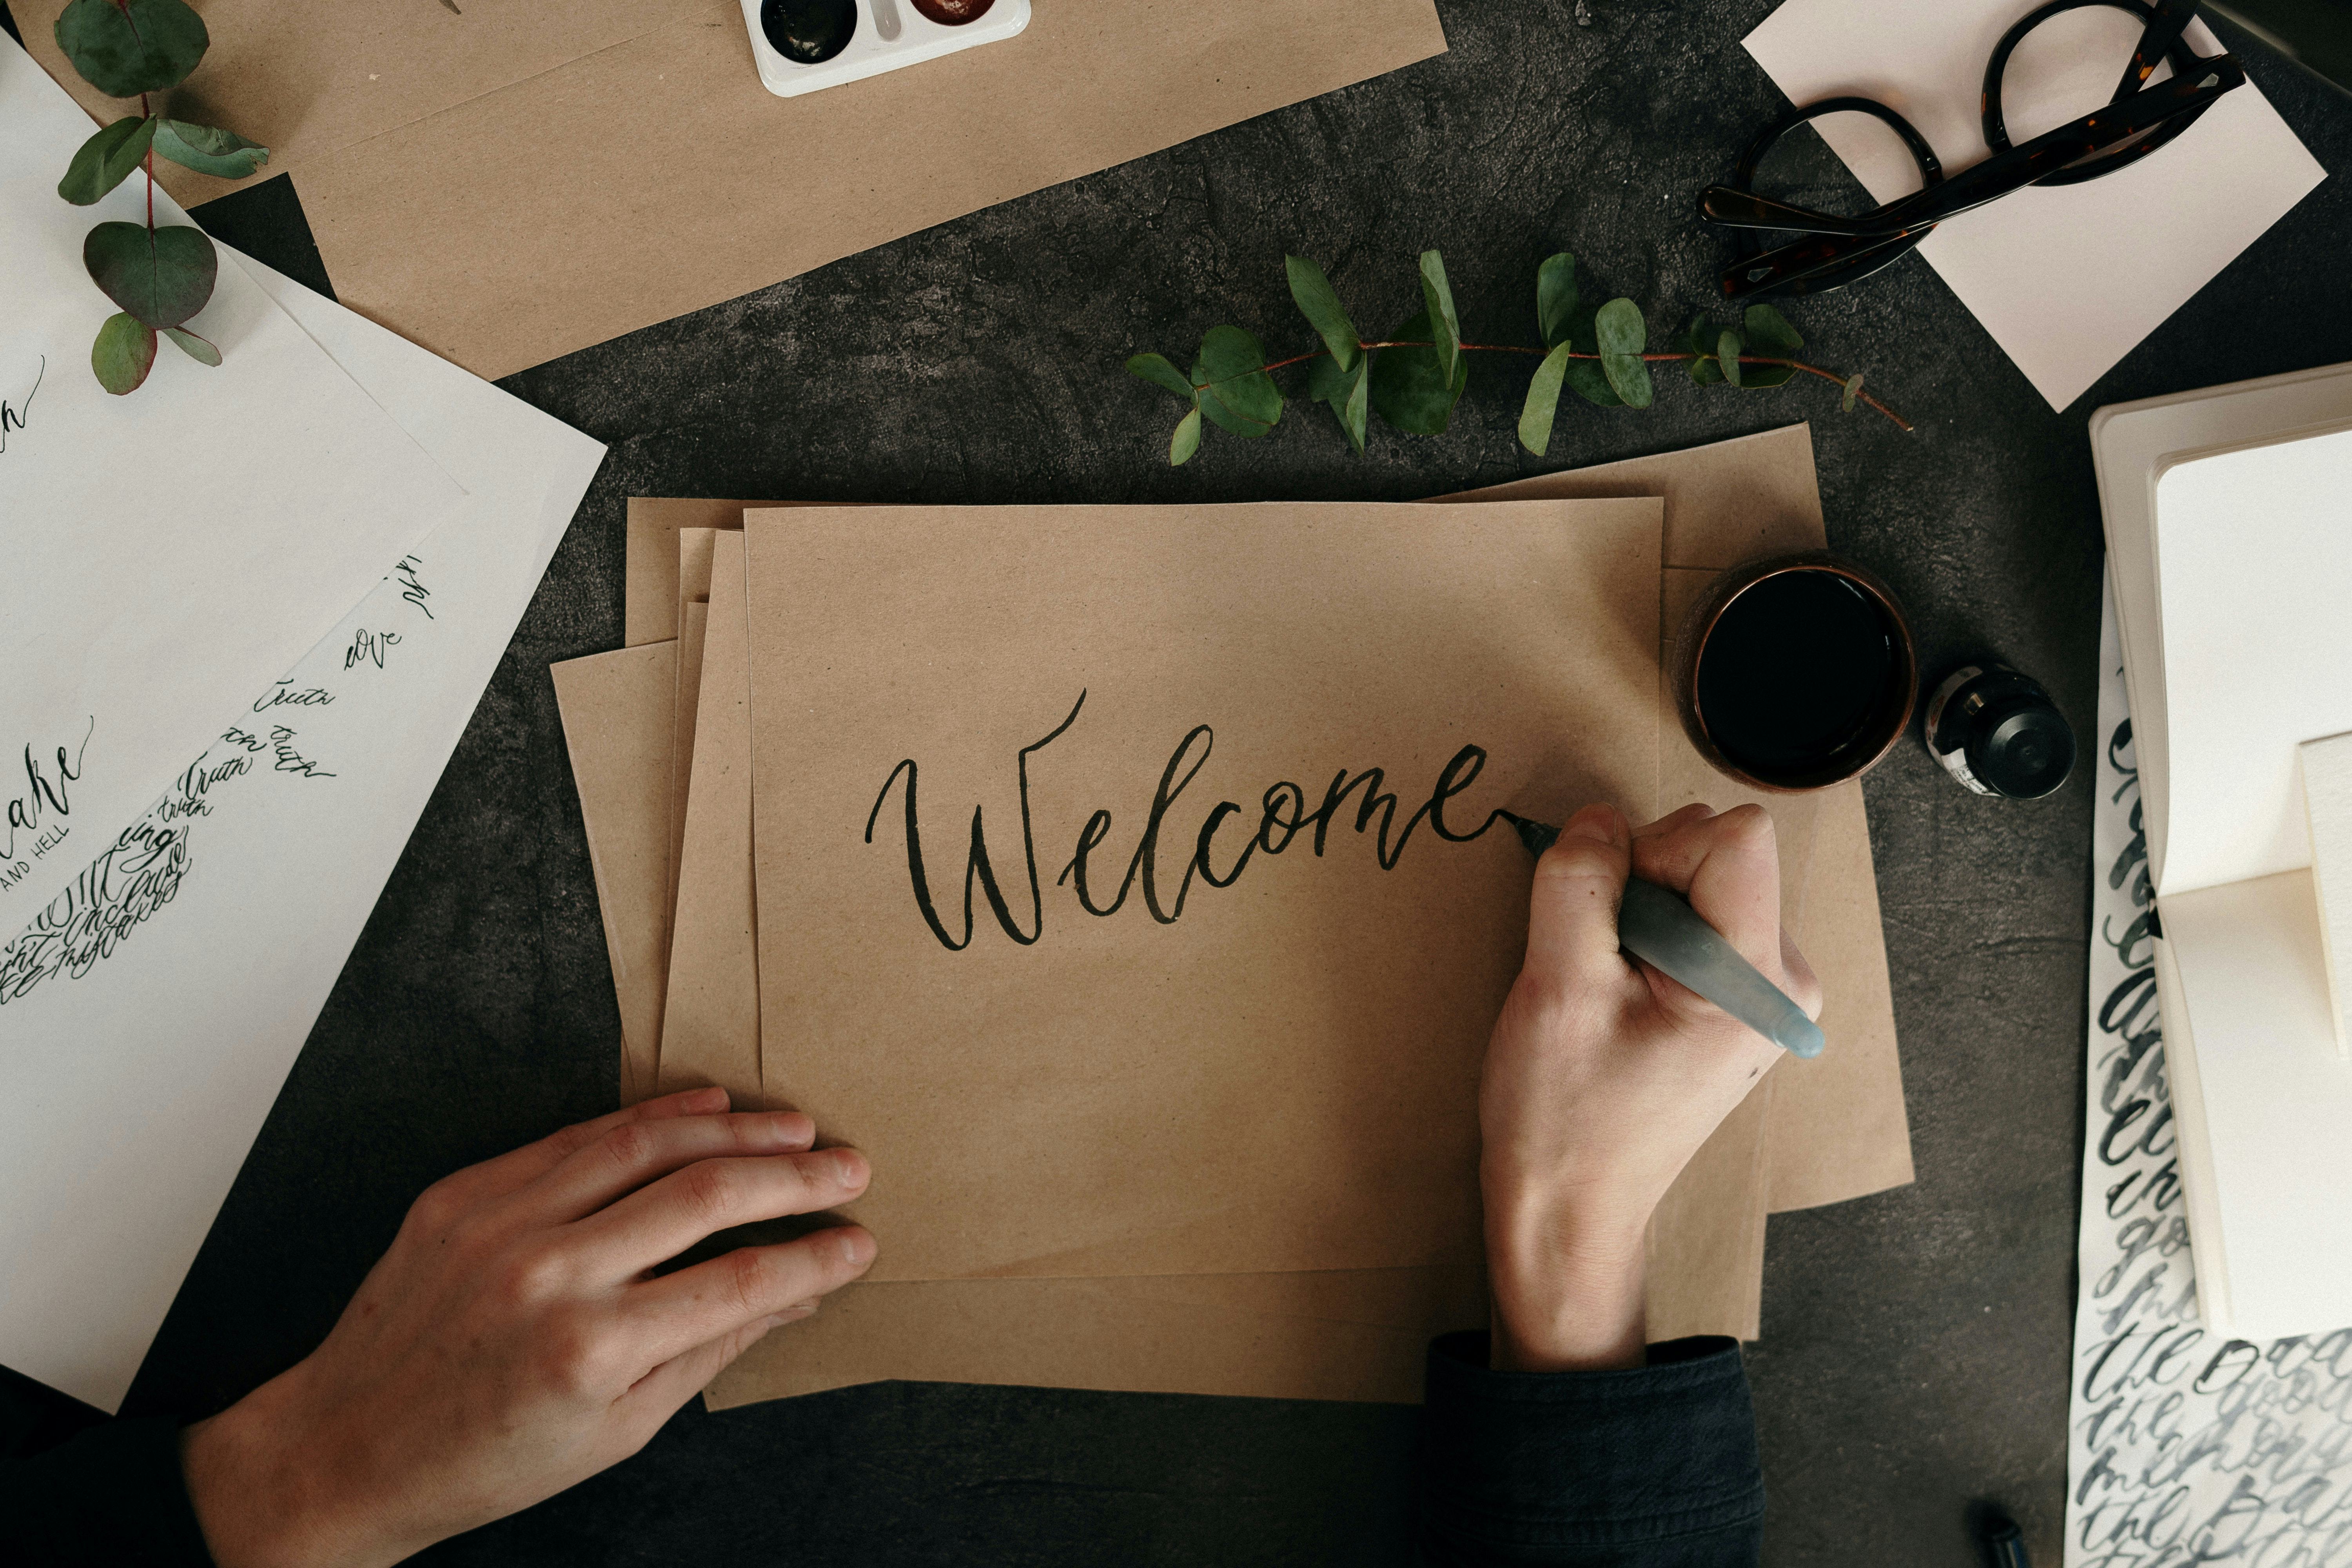 Welcome has been written on brown paper 